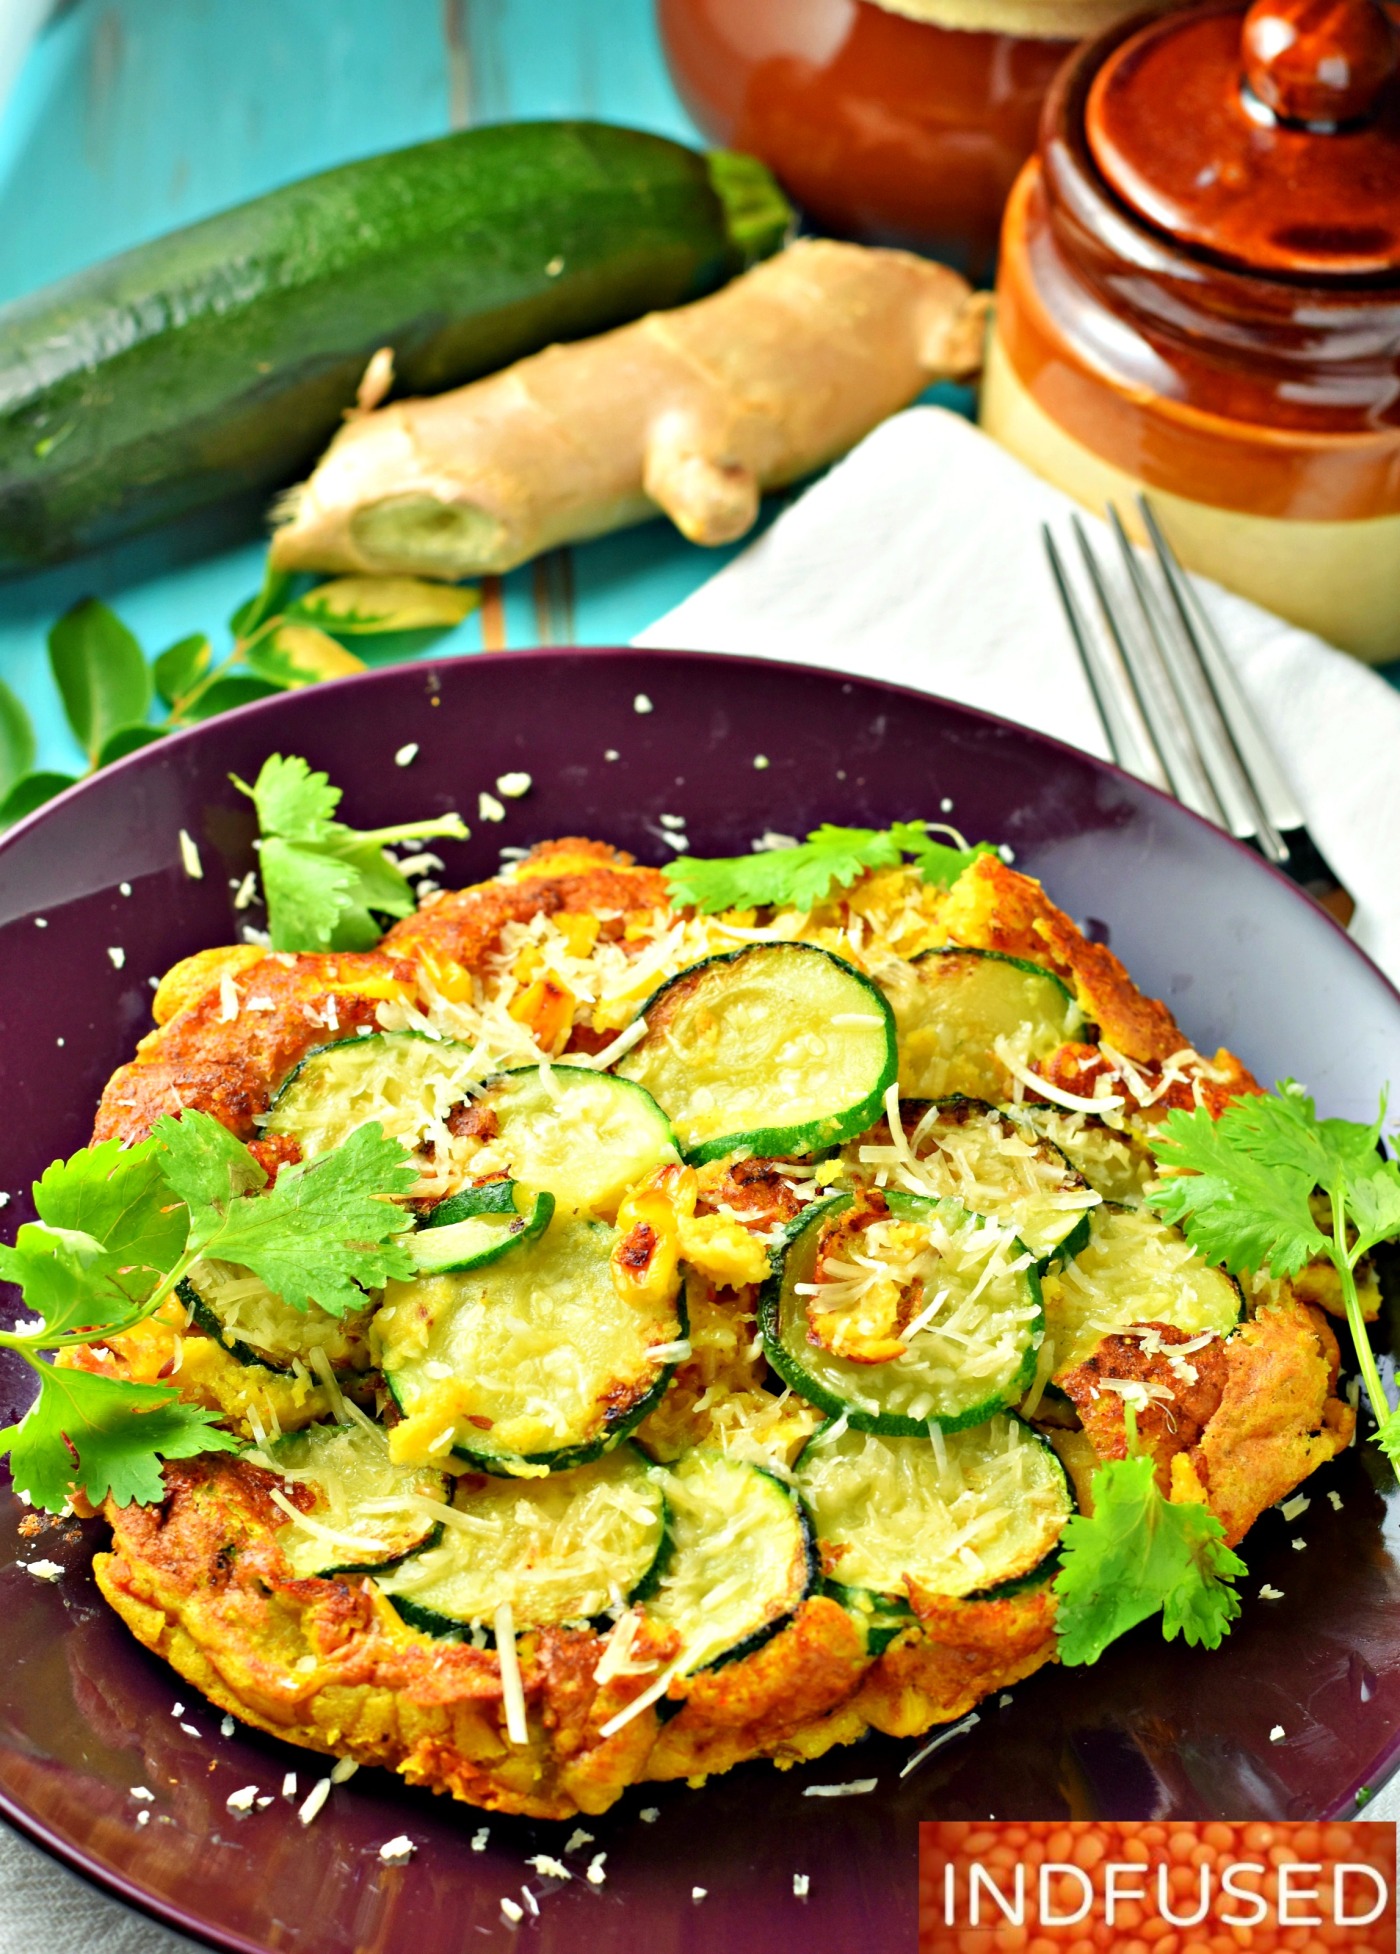 Zesty Zucchini Corn Cakes- vegan option in recipe, vegetarian, low fat recipe that is easy to make. serves 2